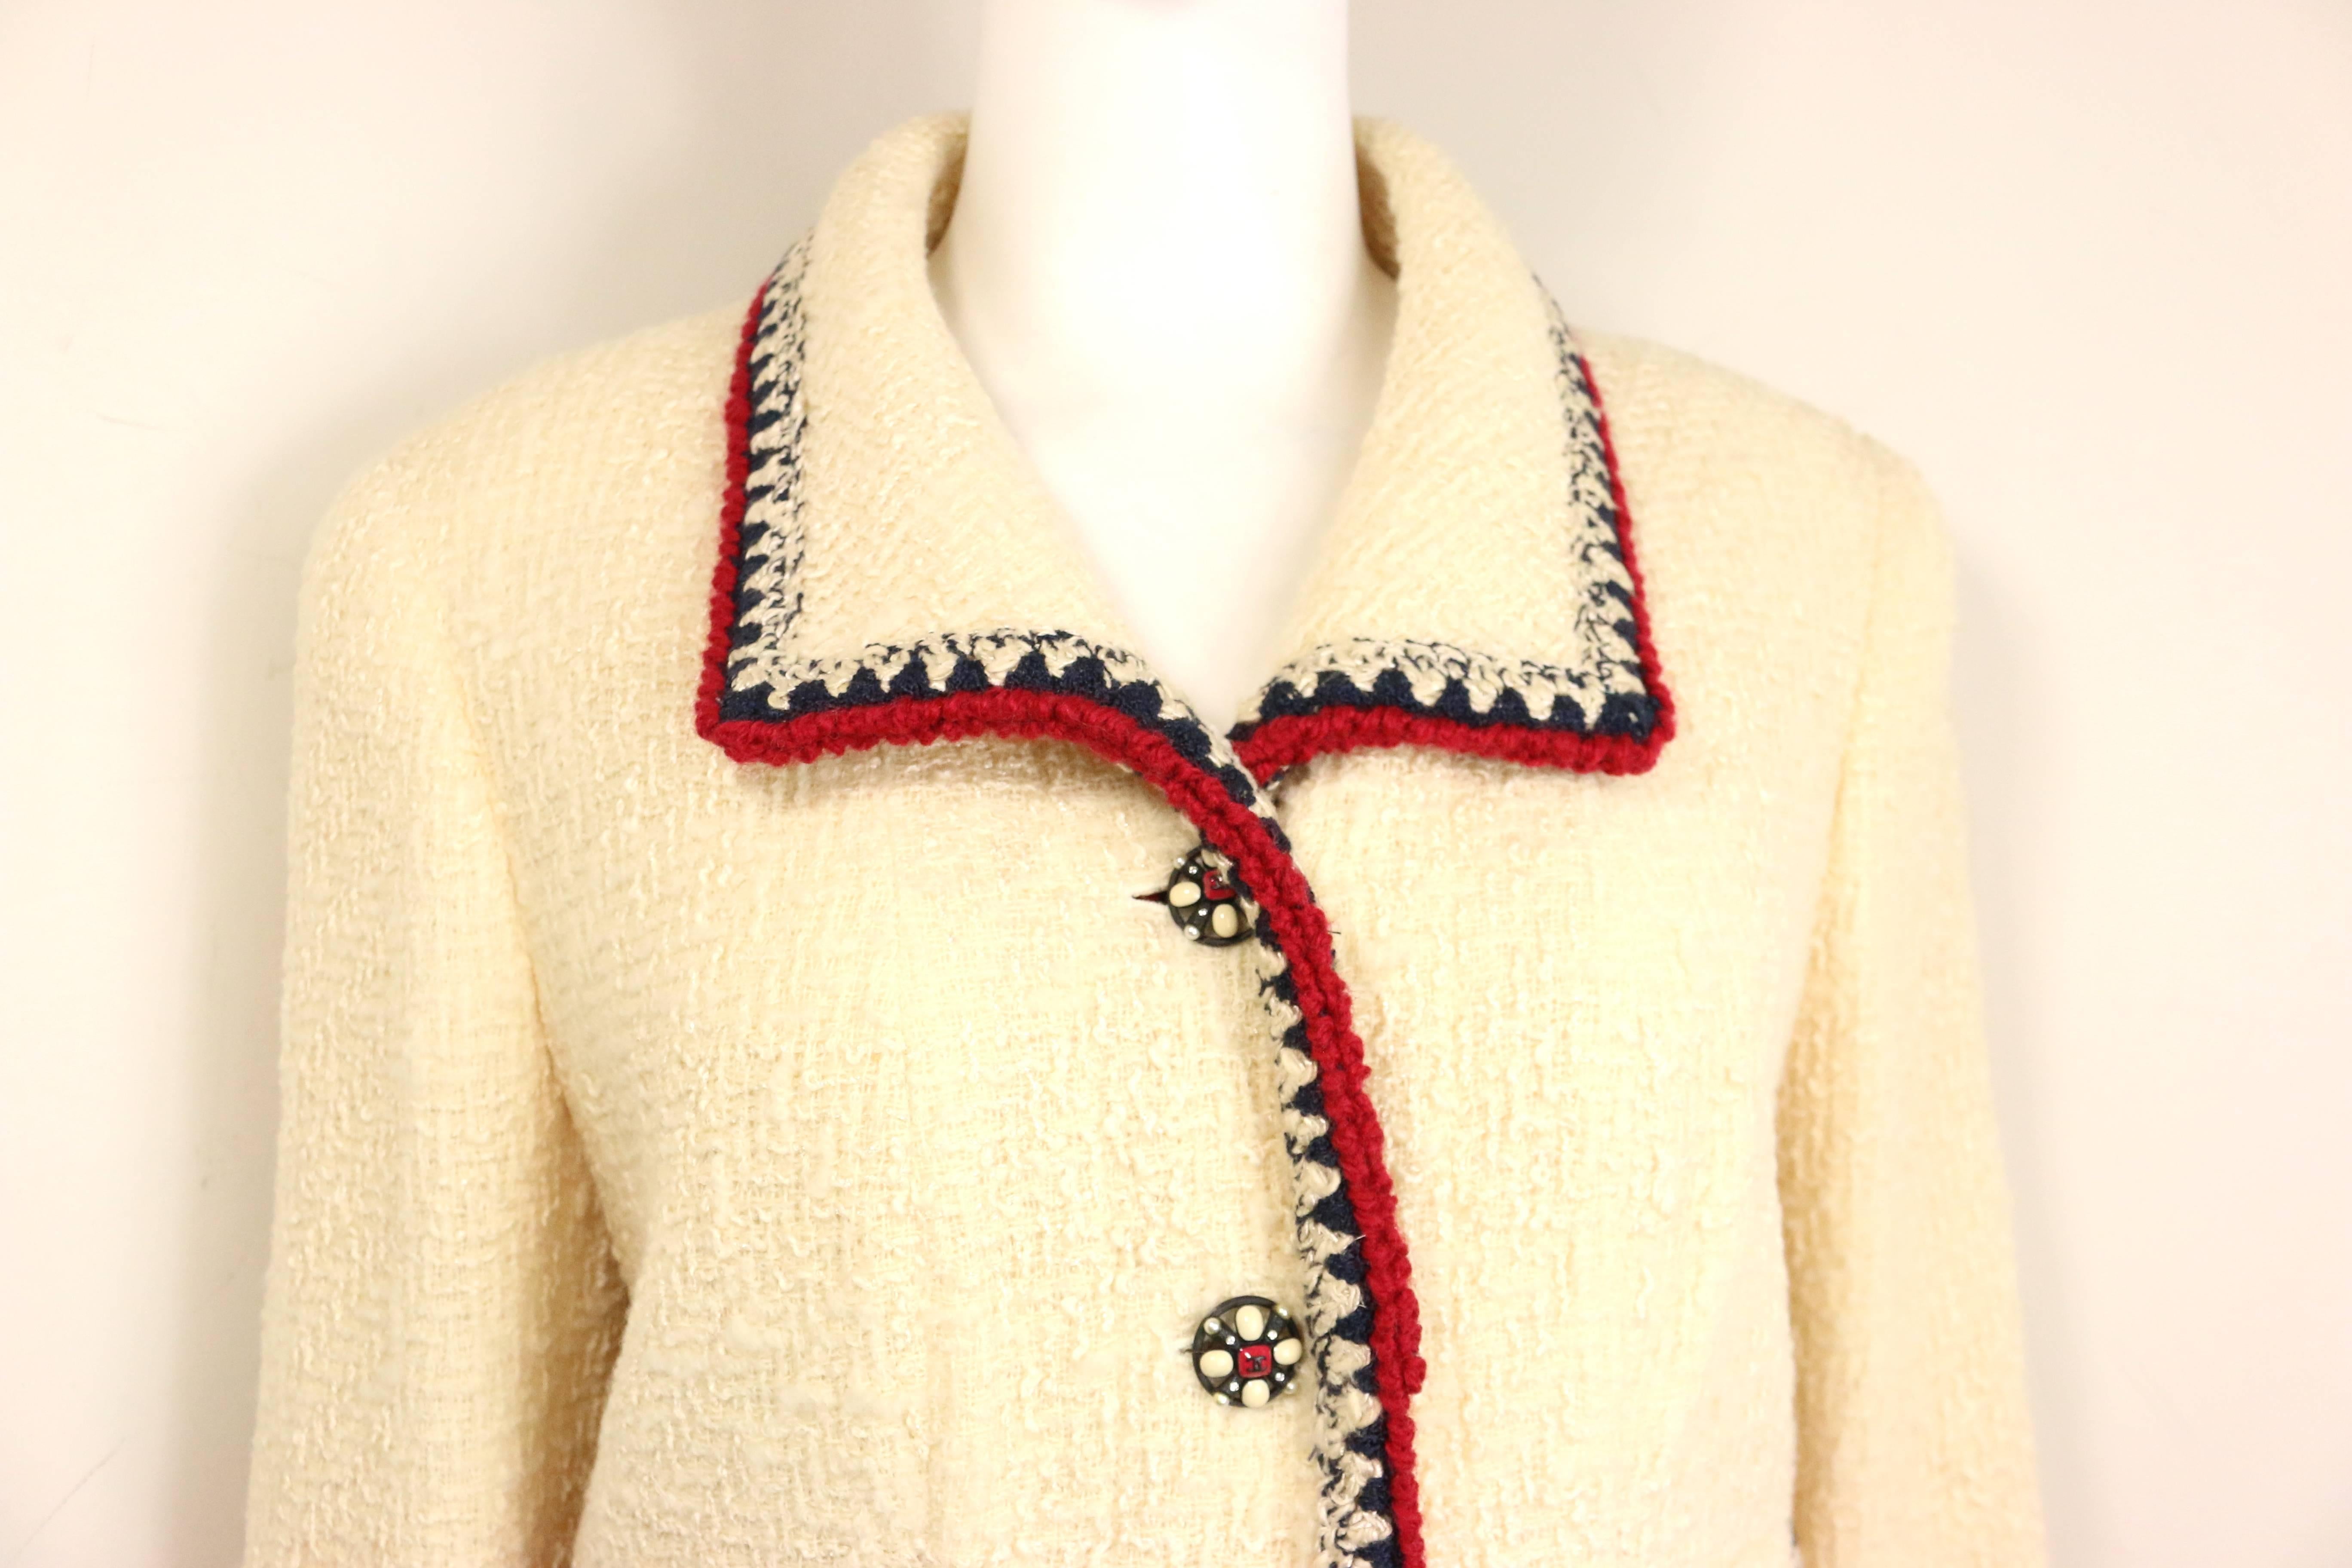 -  Chanel white wool tweed with black and red piping trim jacket from 2006 fall collection. Its a very classic Chanel tweed jacket. 

- Four front pockets with clover 